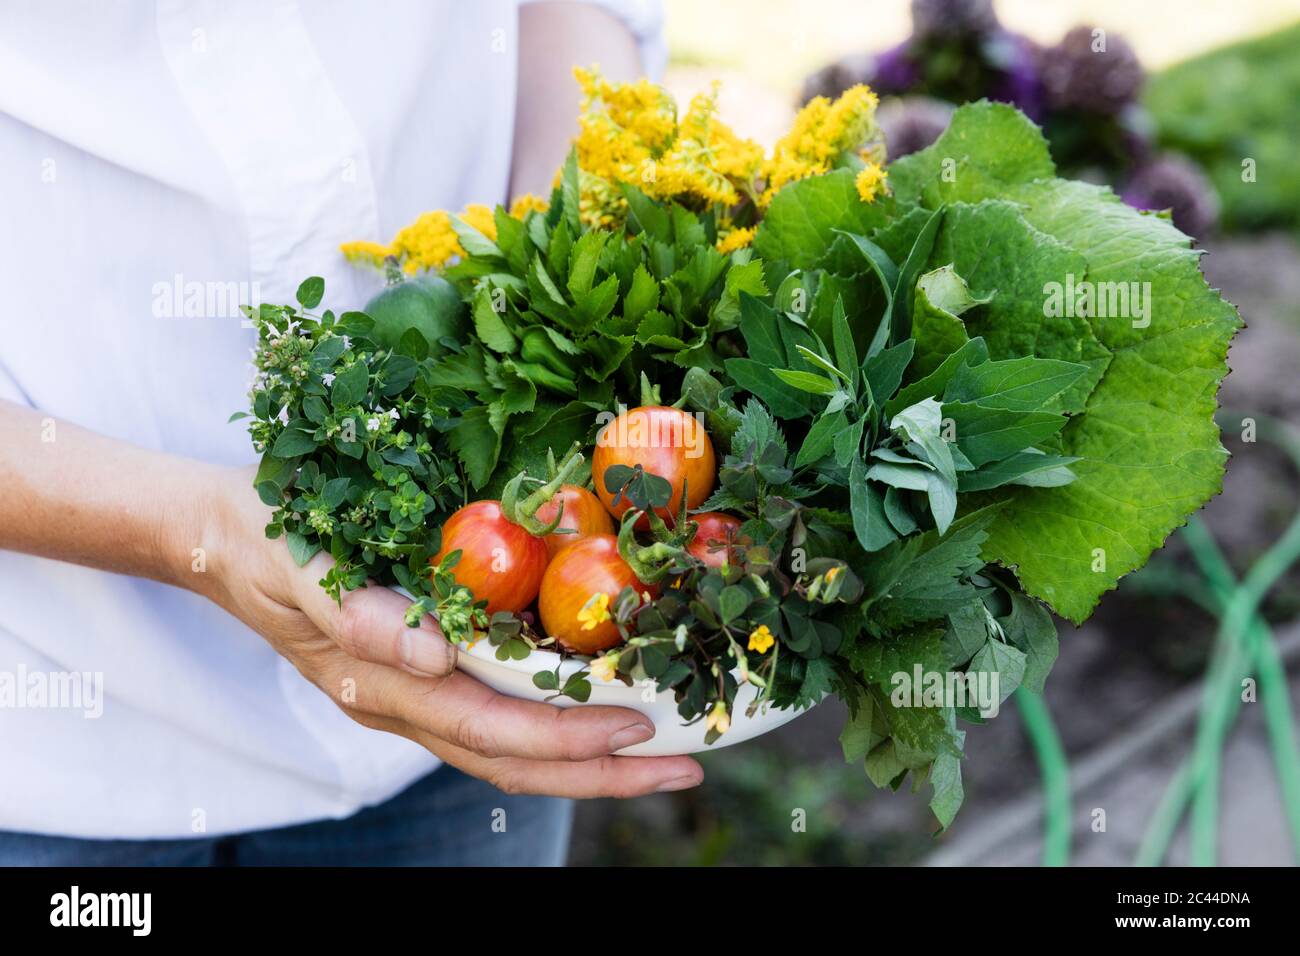 Woman holding bowl of harvested wild herbs sorrel, oregano, coltsfoot, herb gerard, nettle, goldenrod and tomatoes Stock Photo